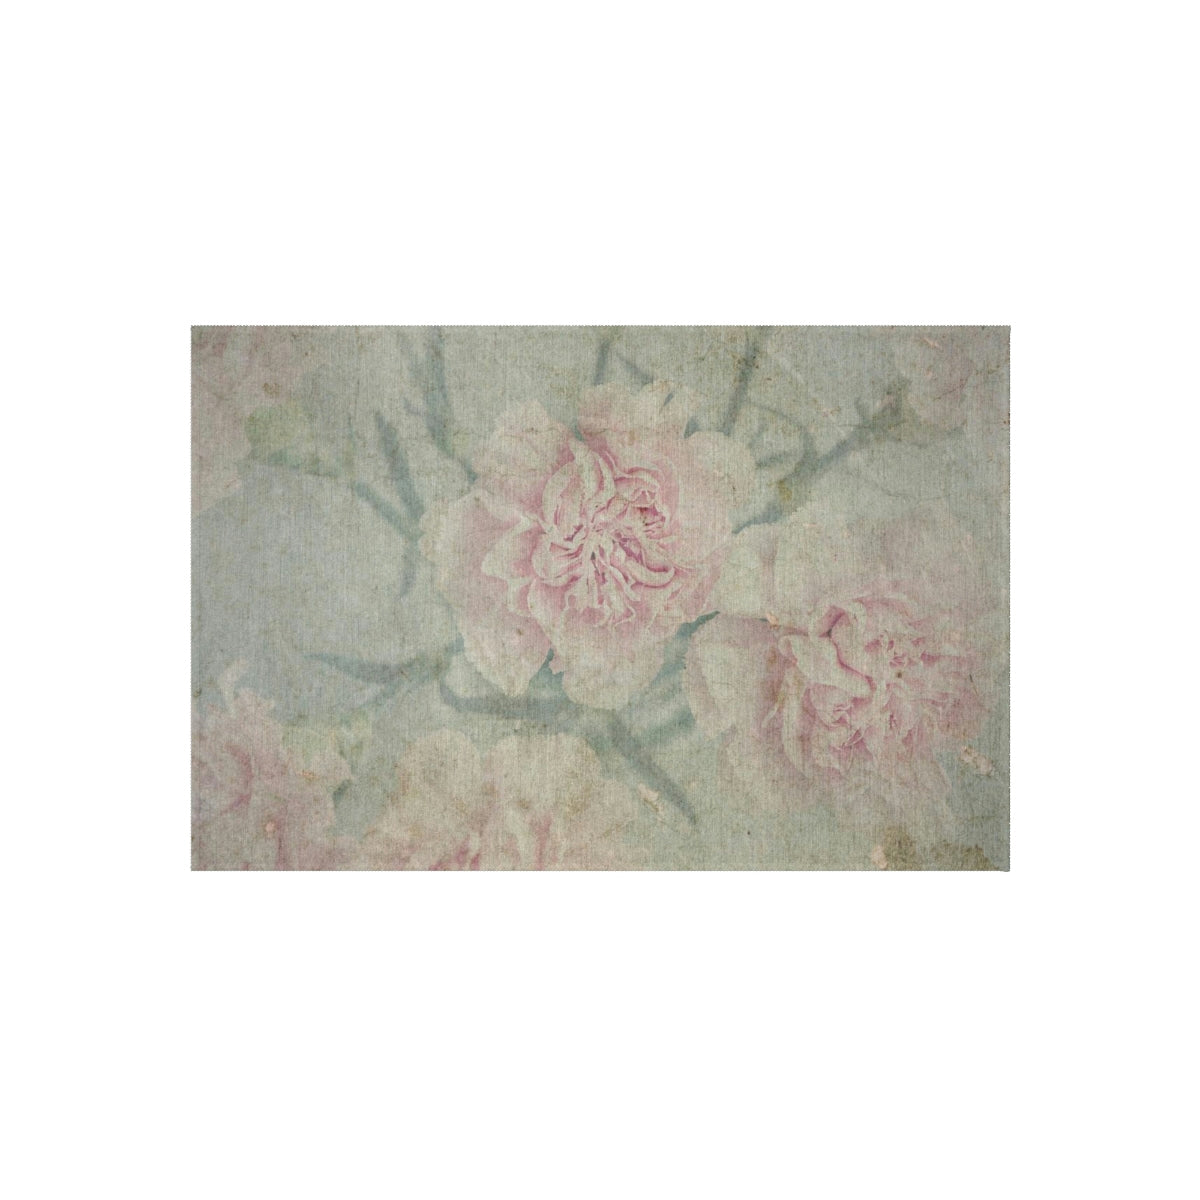 Shabby Chic Rose Print Outdoor Rug for Glamping, Camping, Van Life, Home, and Office